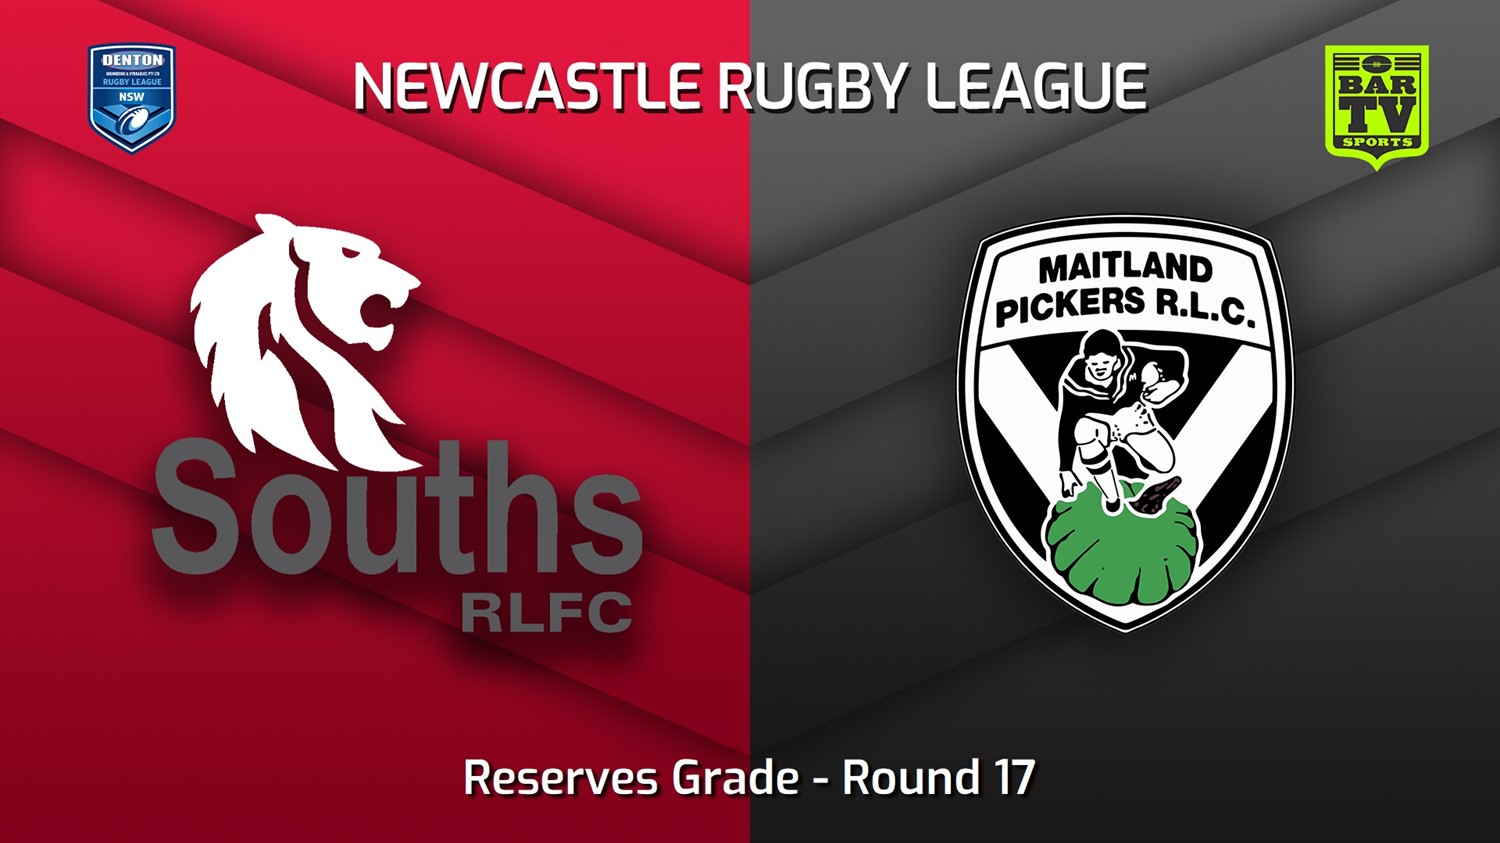 220730-Newcastle Round 17 - Reserves Grade - South Newcastle Lions v Maitland Pickers Slate Image